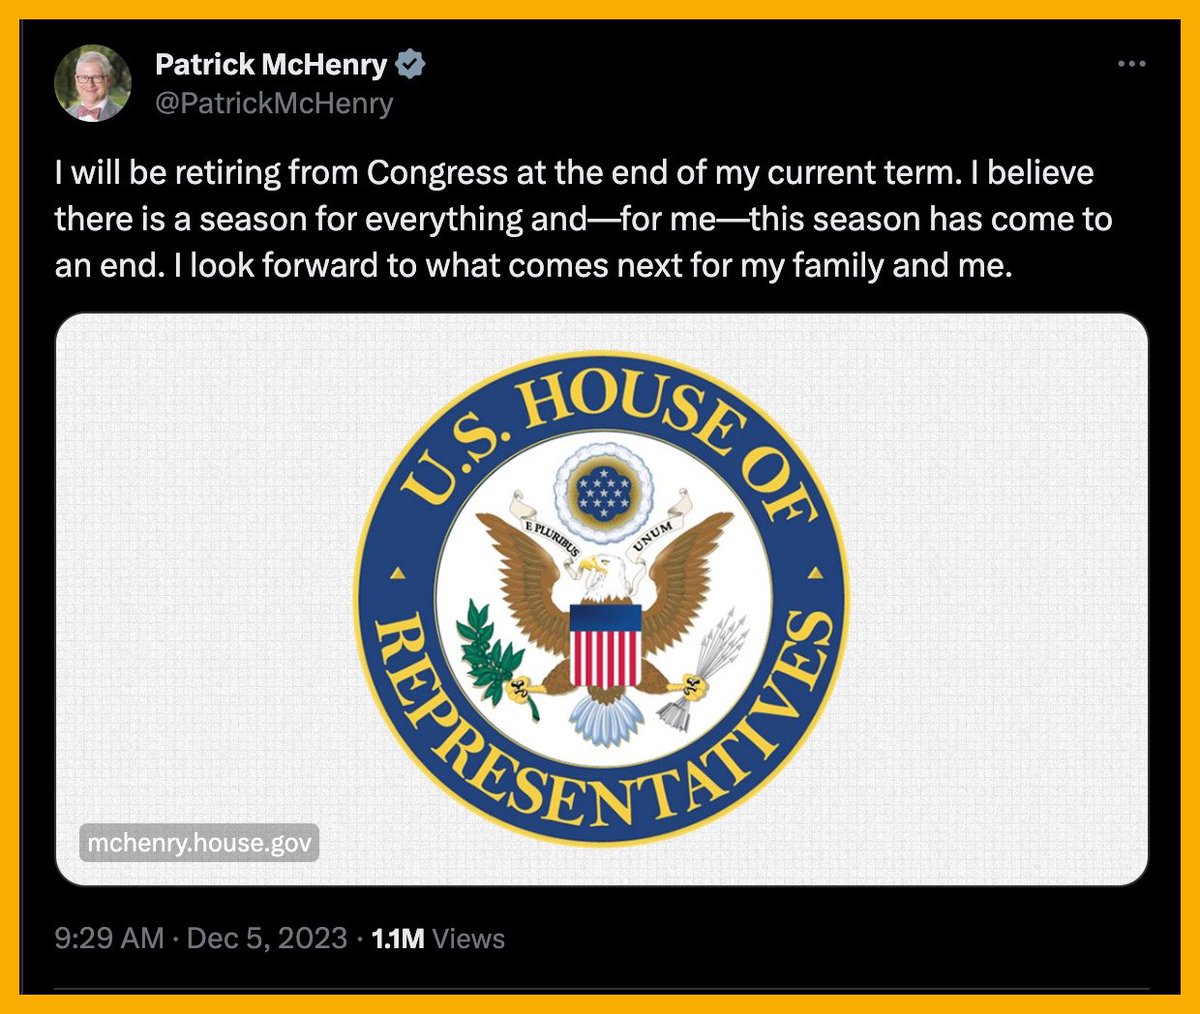 Chairman of the House Financial Services Committee 🇺🇸 Patrick McHenry will retire after completing his current term, which is in January 2025.